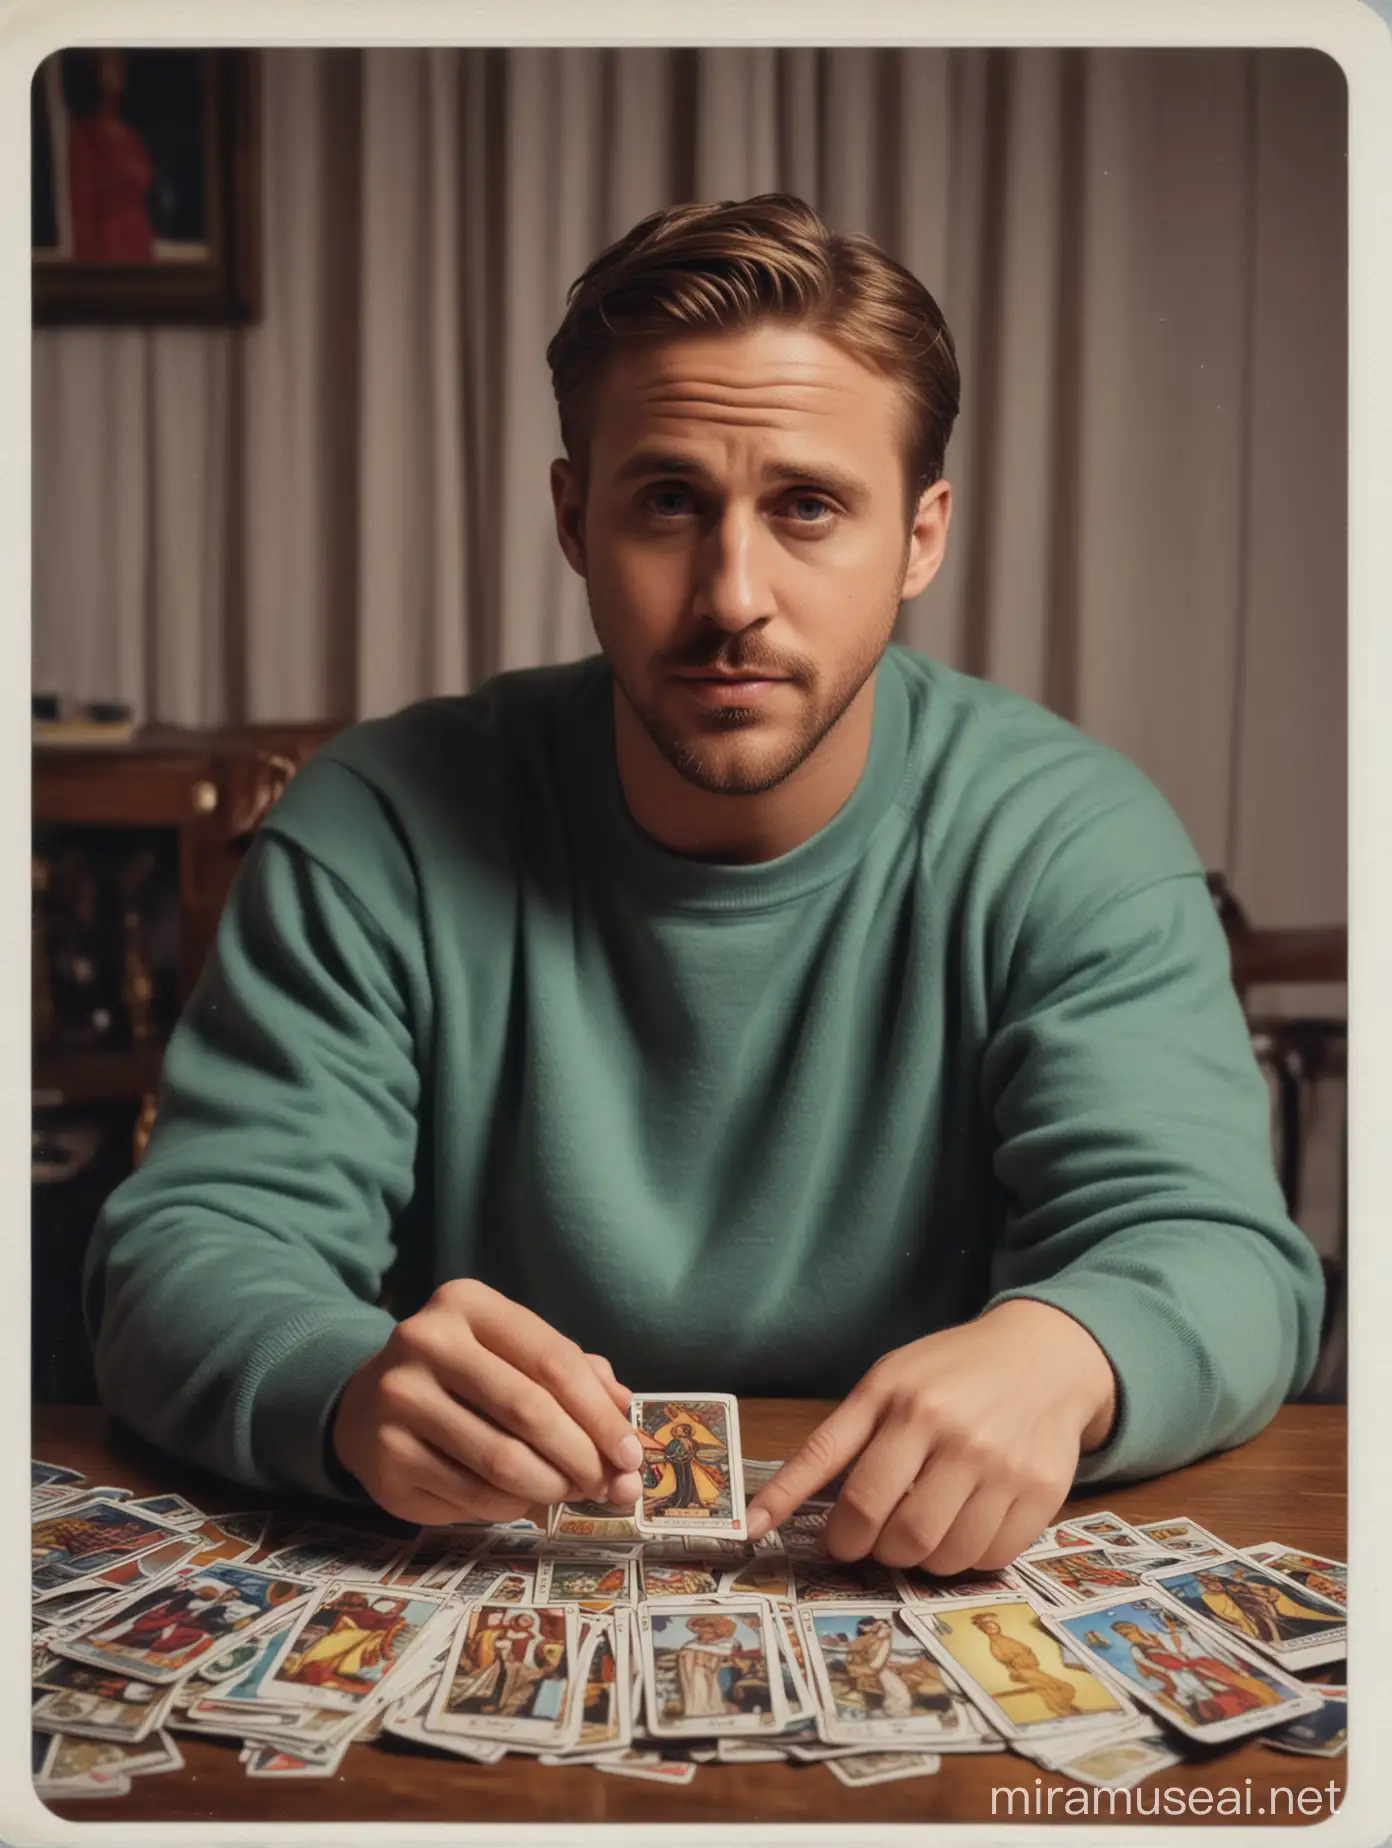 Ryan Gosling Reading Tarot Cards and Taking Polaroid Picture